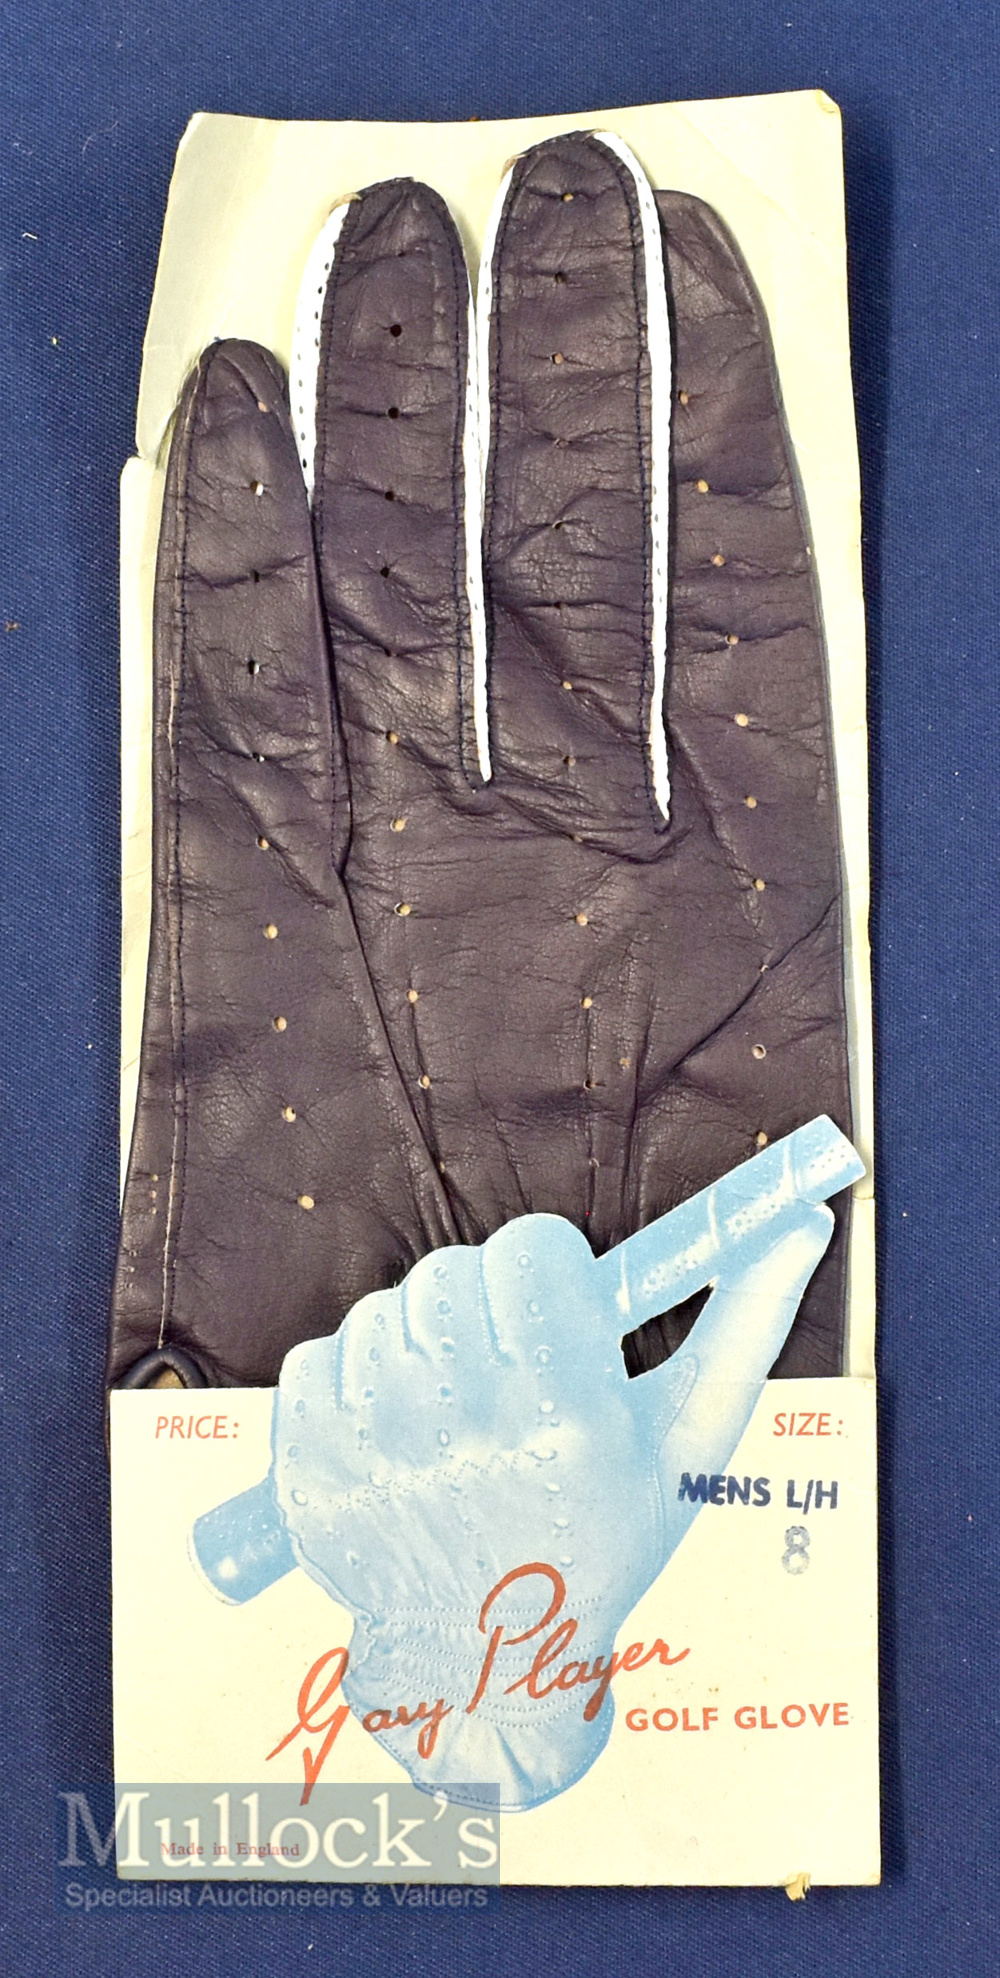 Gary Player Golf glove made in England size 8 L/H - with original wrappers, appears in very good